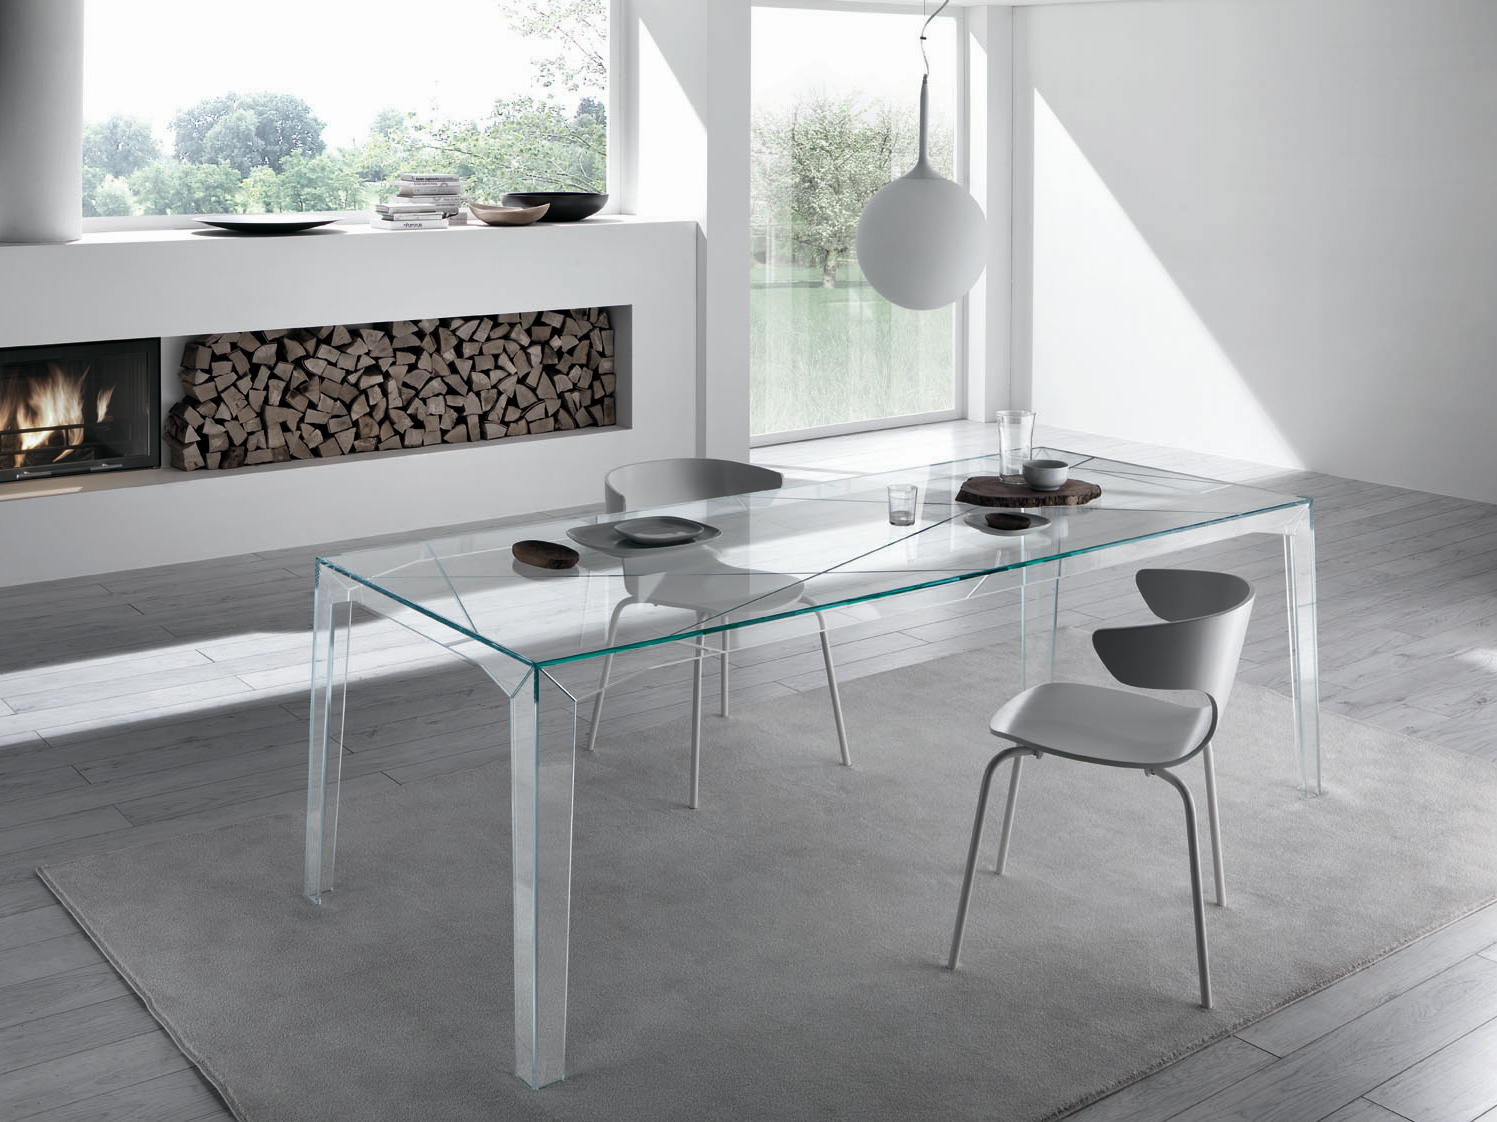 Fragments Table | Design Is This